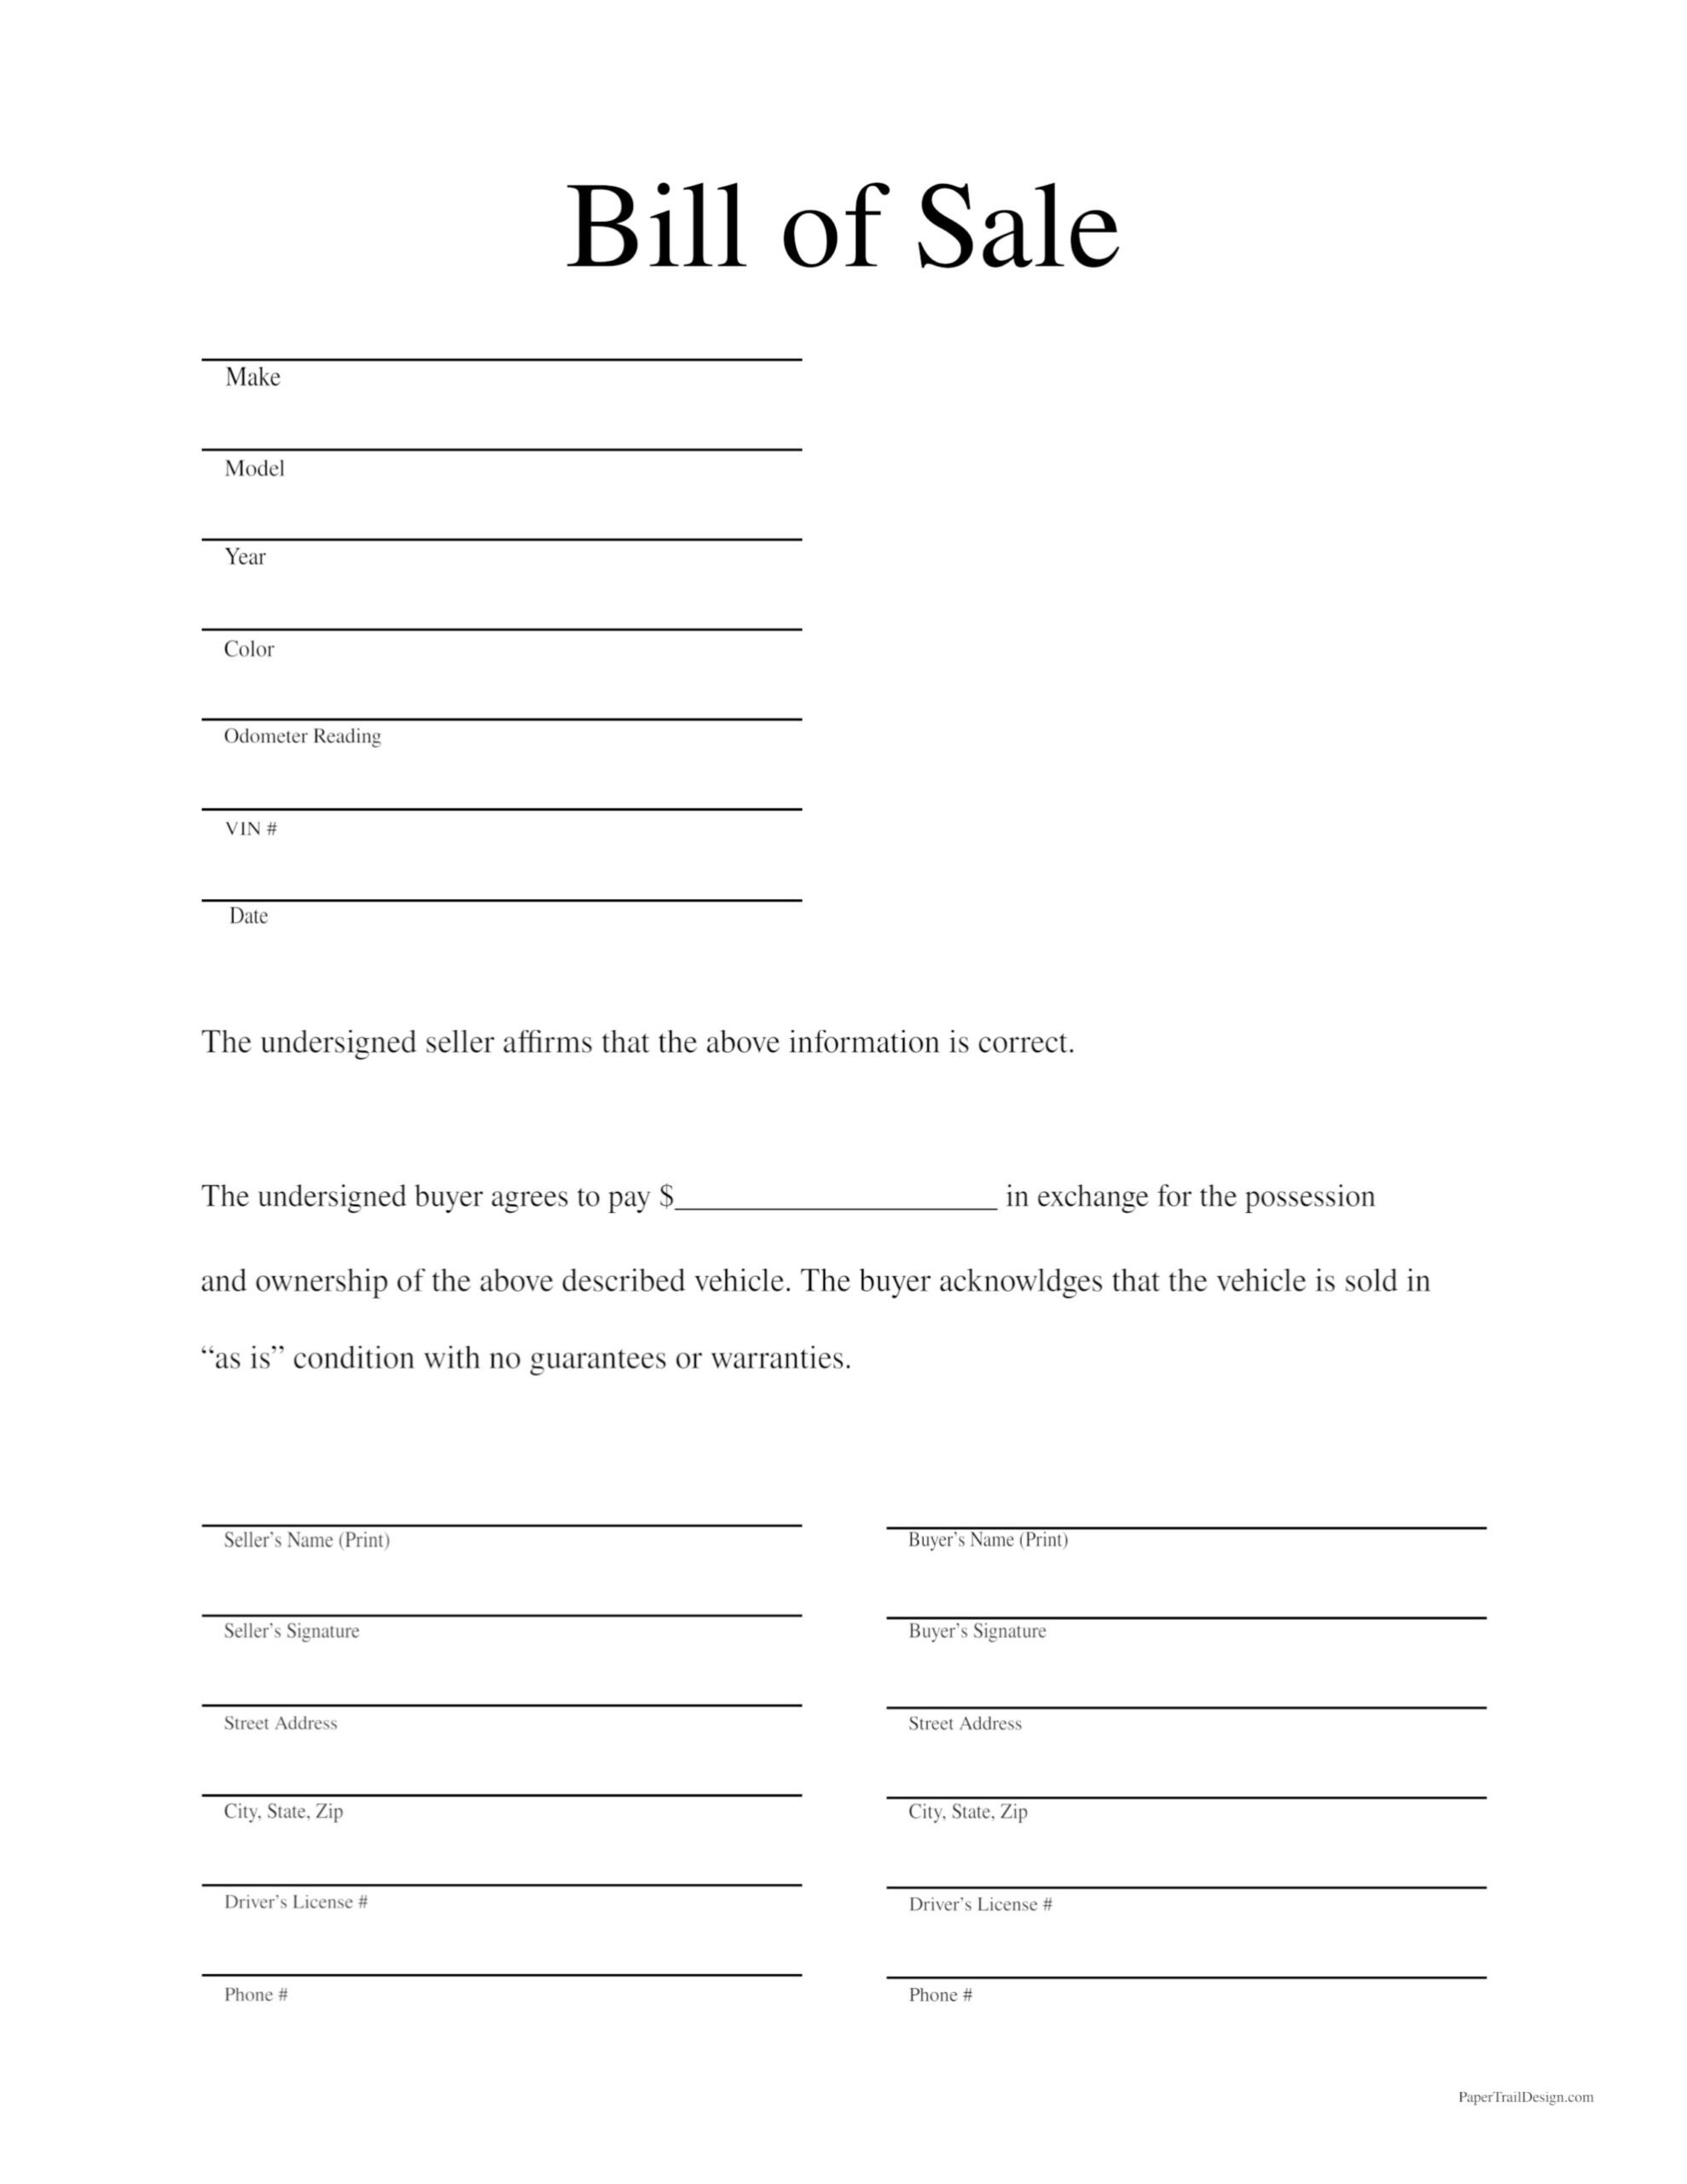 Free Printable Bill Of Sale Template - Paper Trail Design intended for Free Printable Bill Of Sale For Car